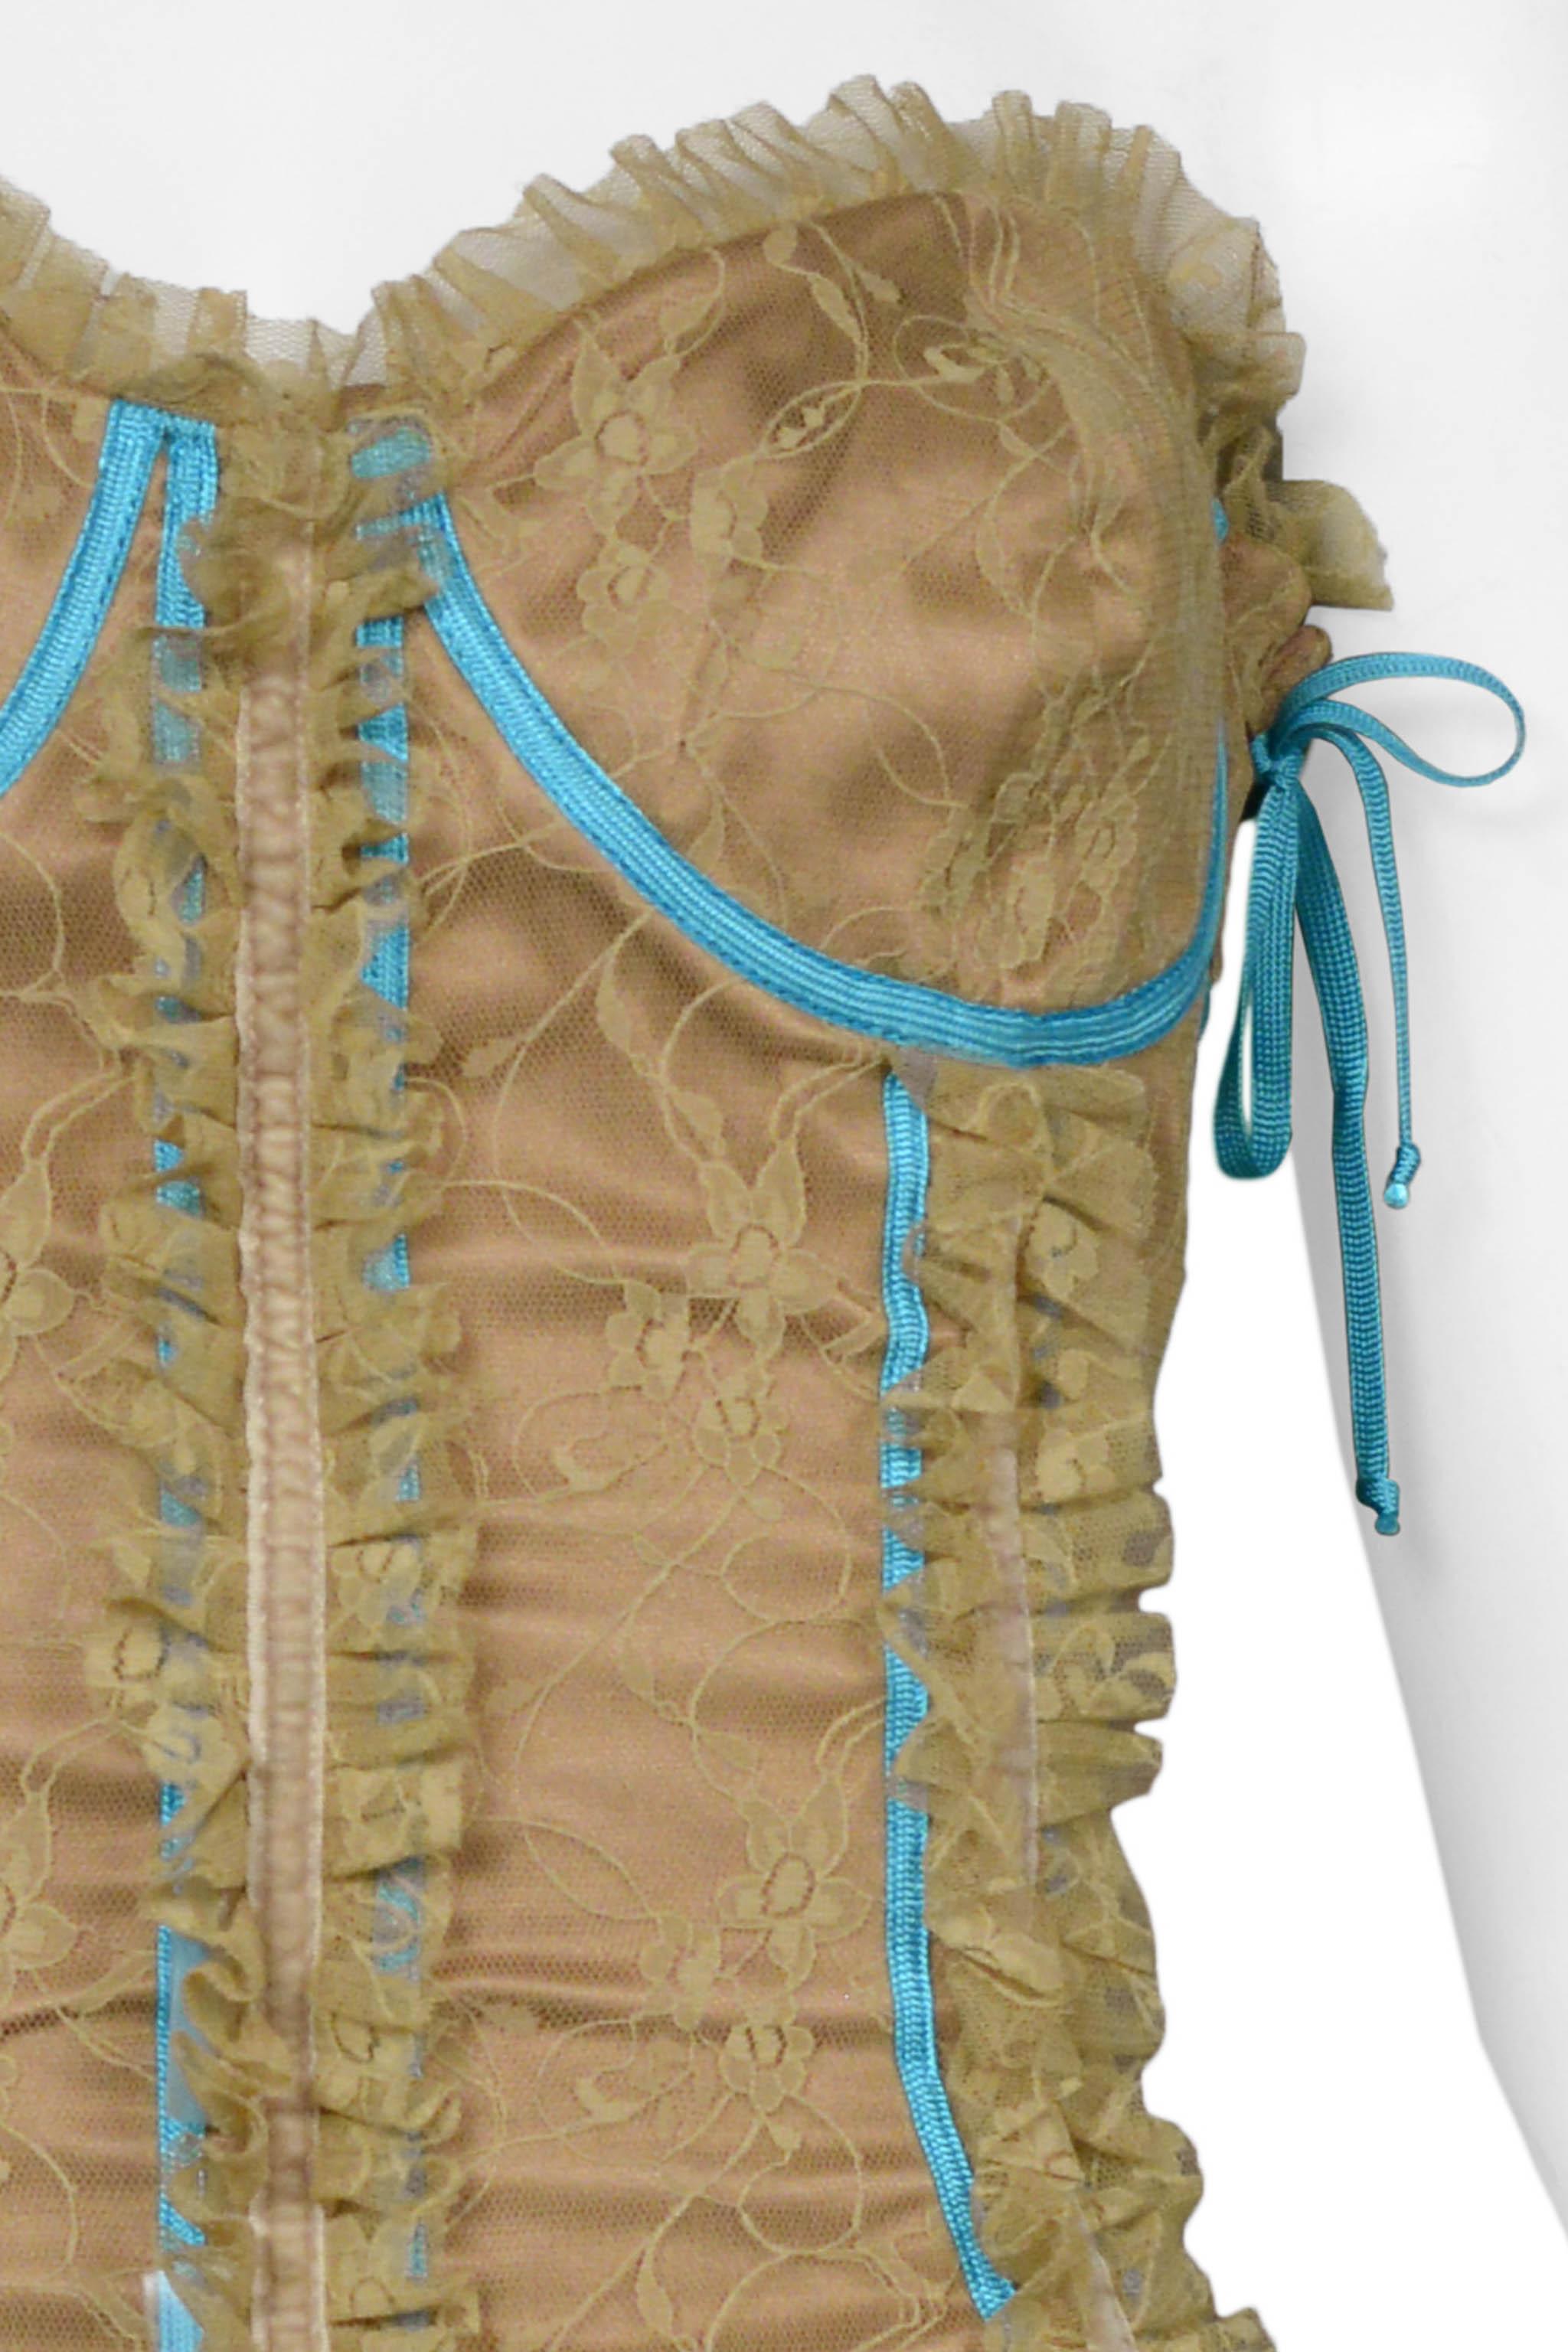 Dolce & Gabbana Lace Corset Top With Blue Laces 2002 In Excellent Condition For Sale In Los Angeles, CA